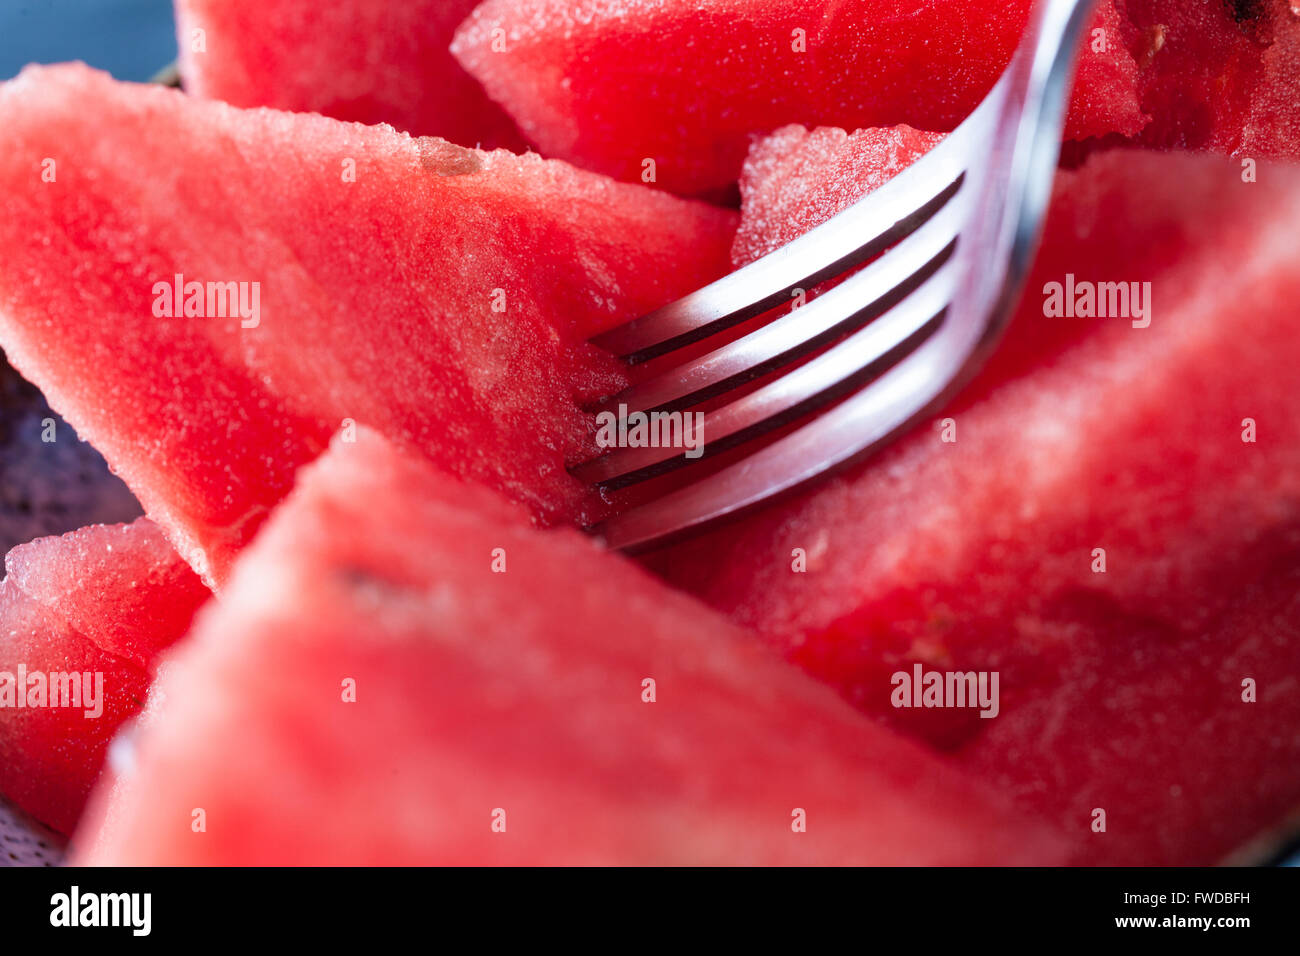 Watermelon slices with fork extreme closeup. Shallow depth of field. Stock Photo